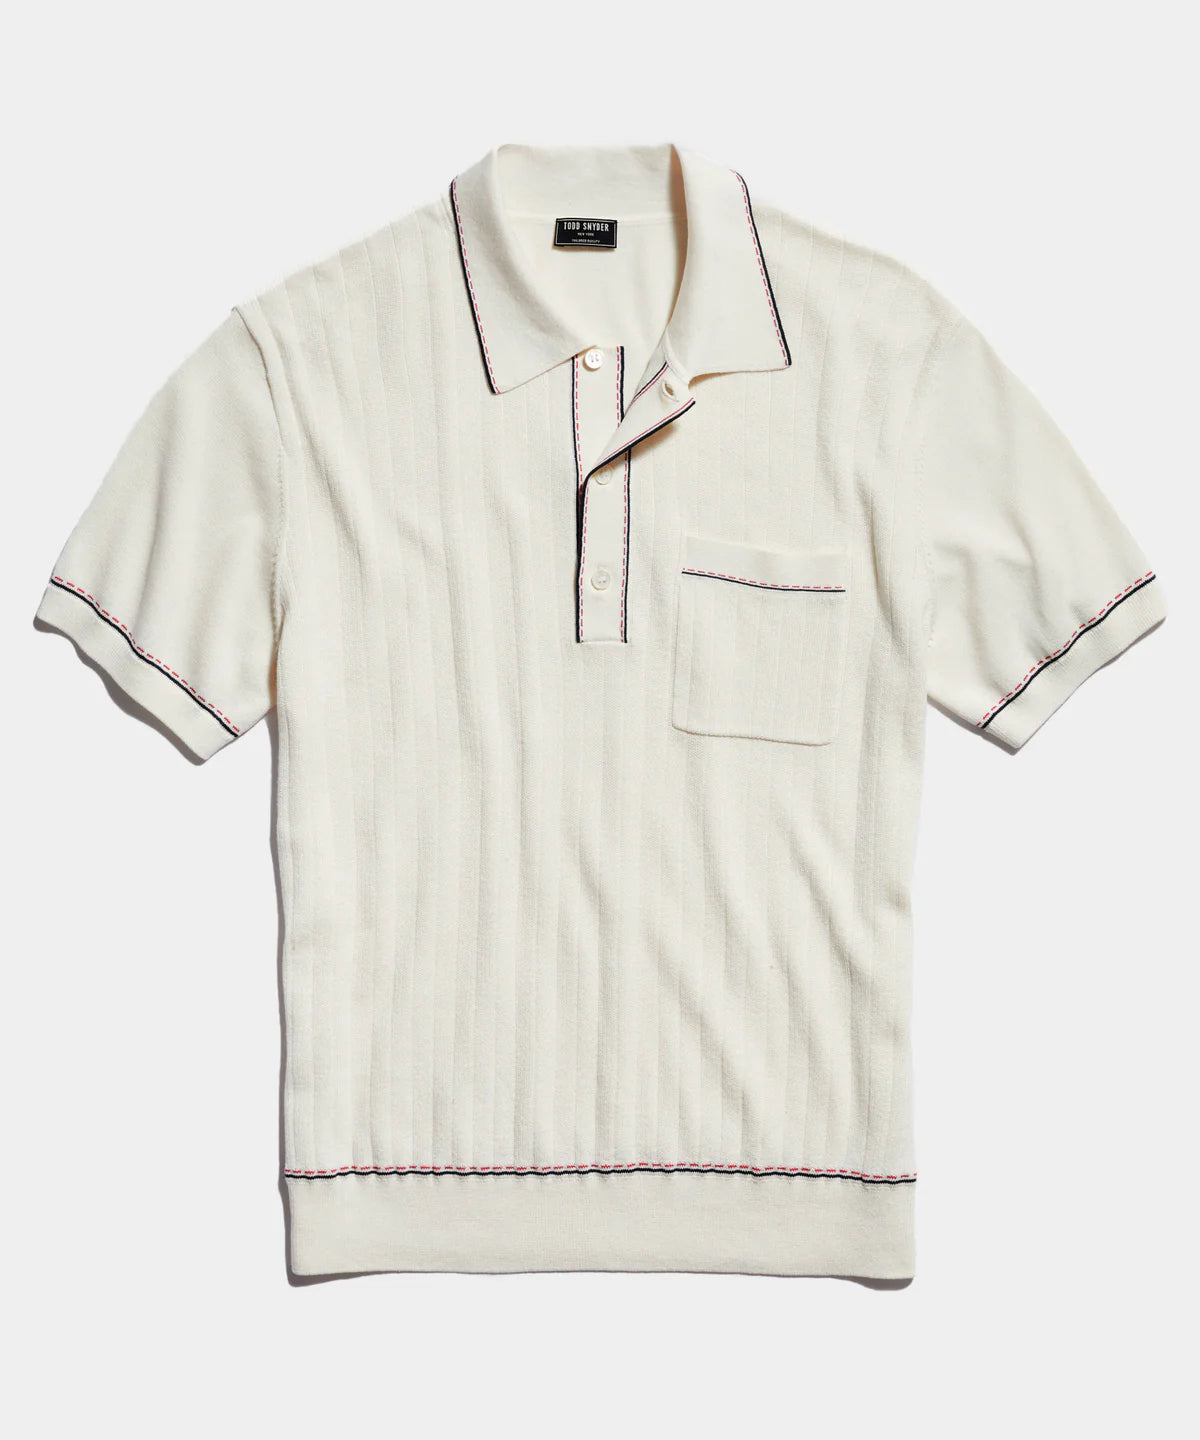 Todd Snyder - TODD SNYDER ITALIAN COTTON SILK TIPPED RIVIERA SWEATER POLO IN IVORY - Rent With Thred